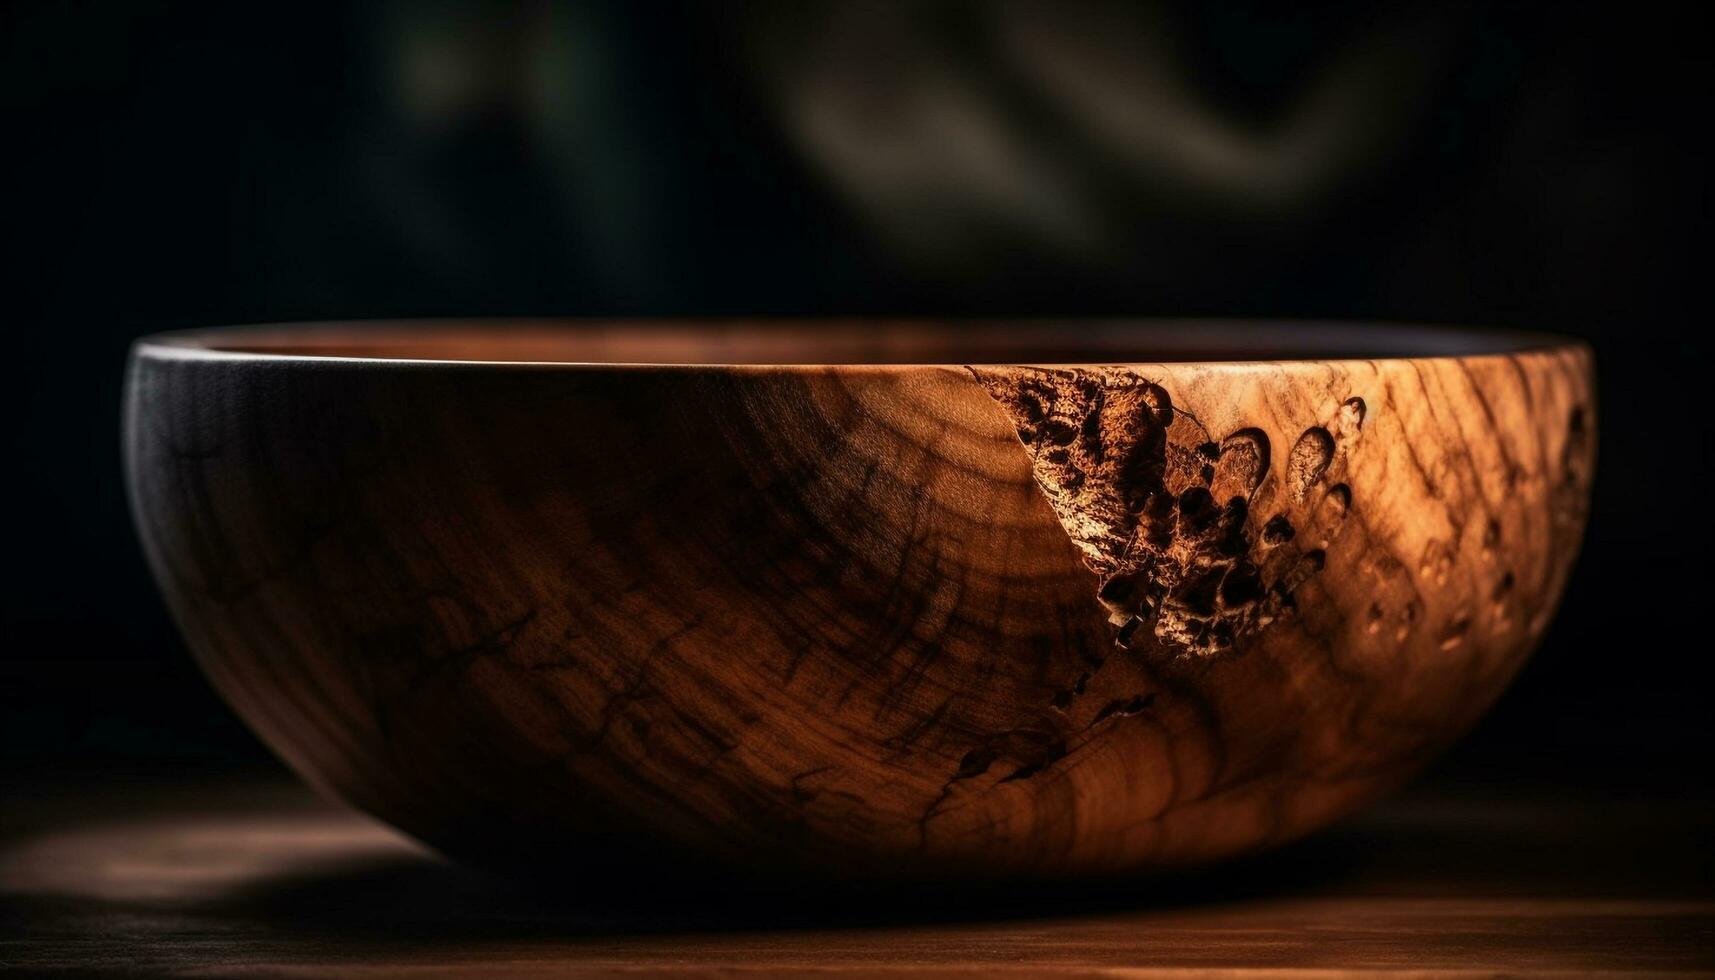 Rustic earthenware bowl on wooden table centerpiece generated by AI photo